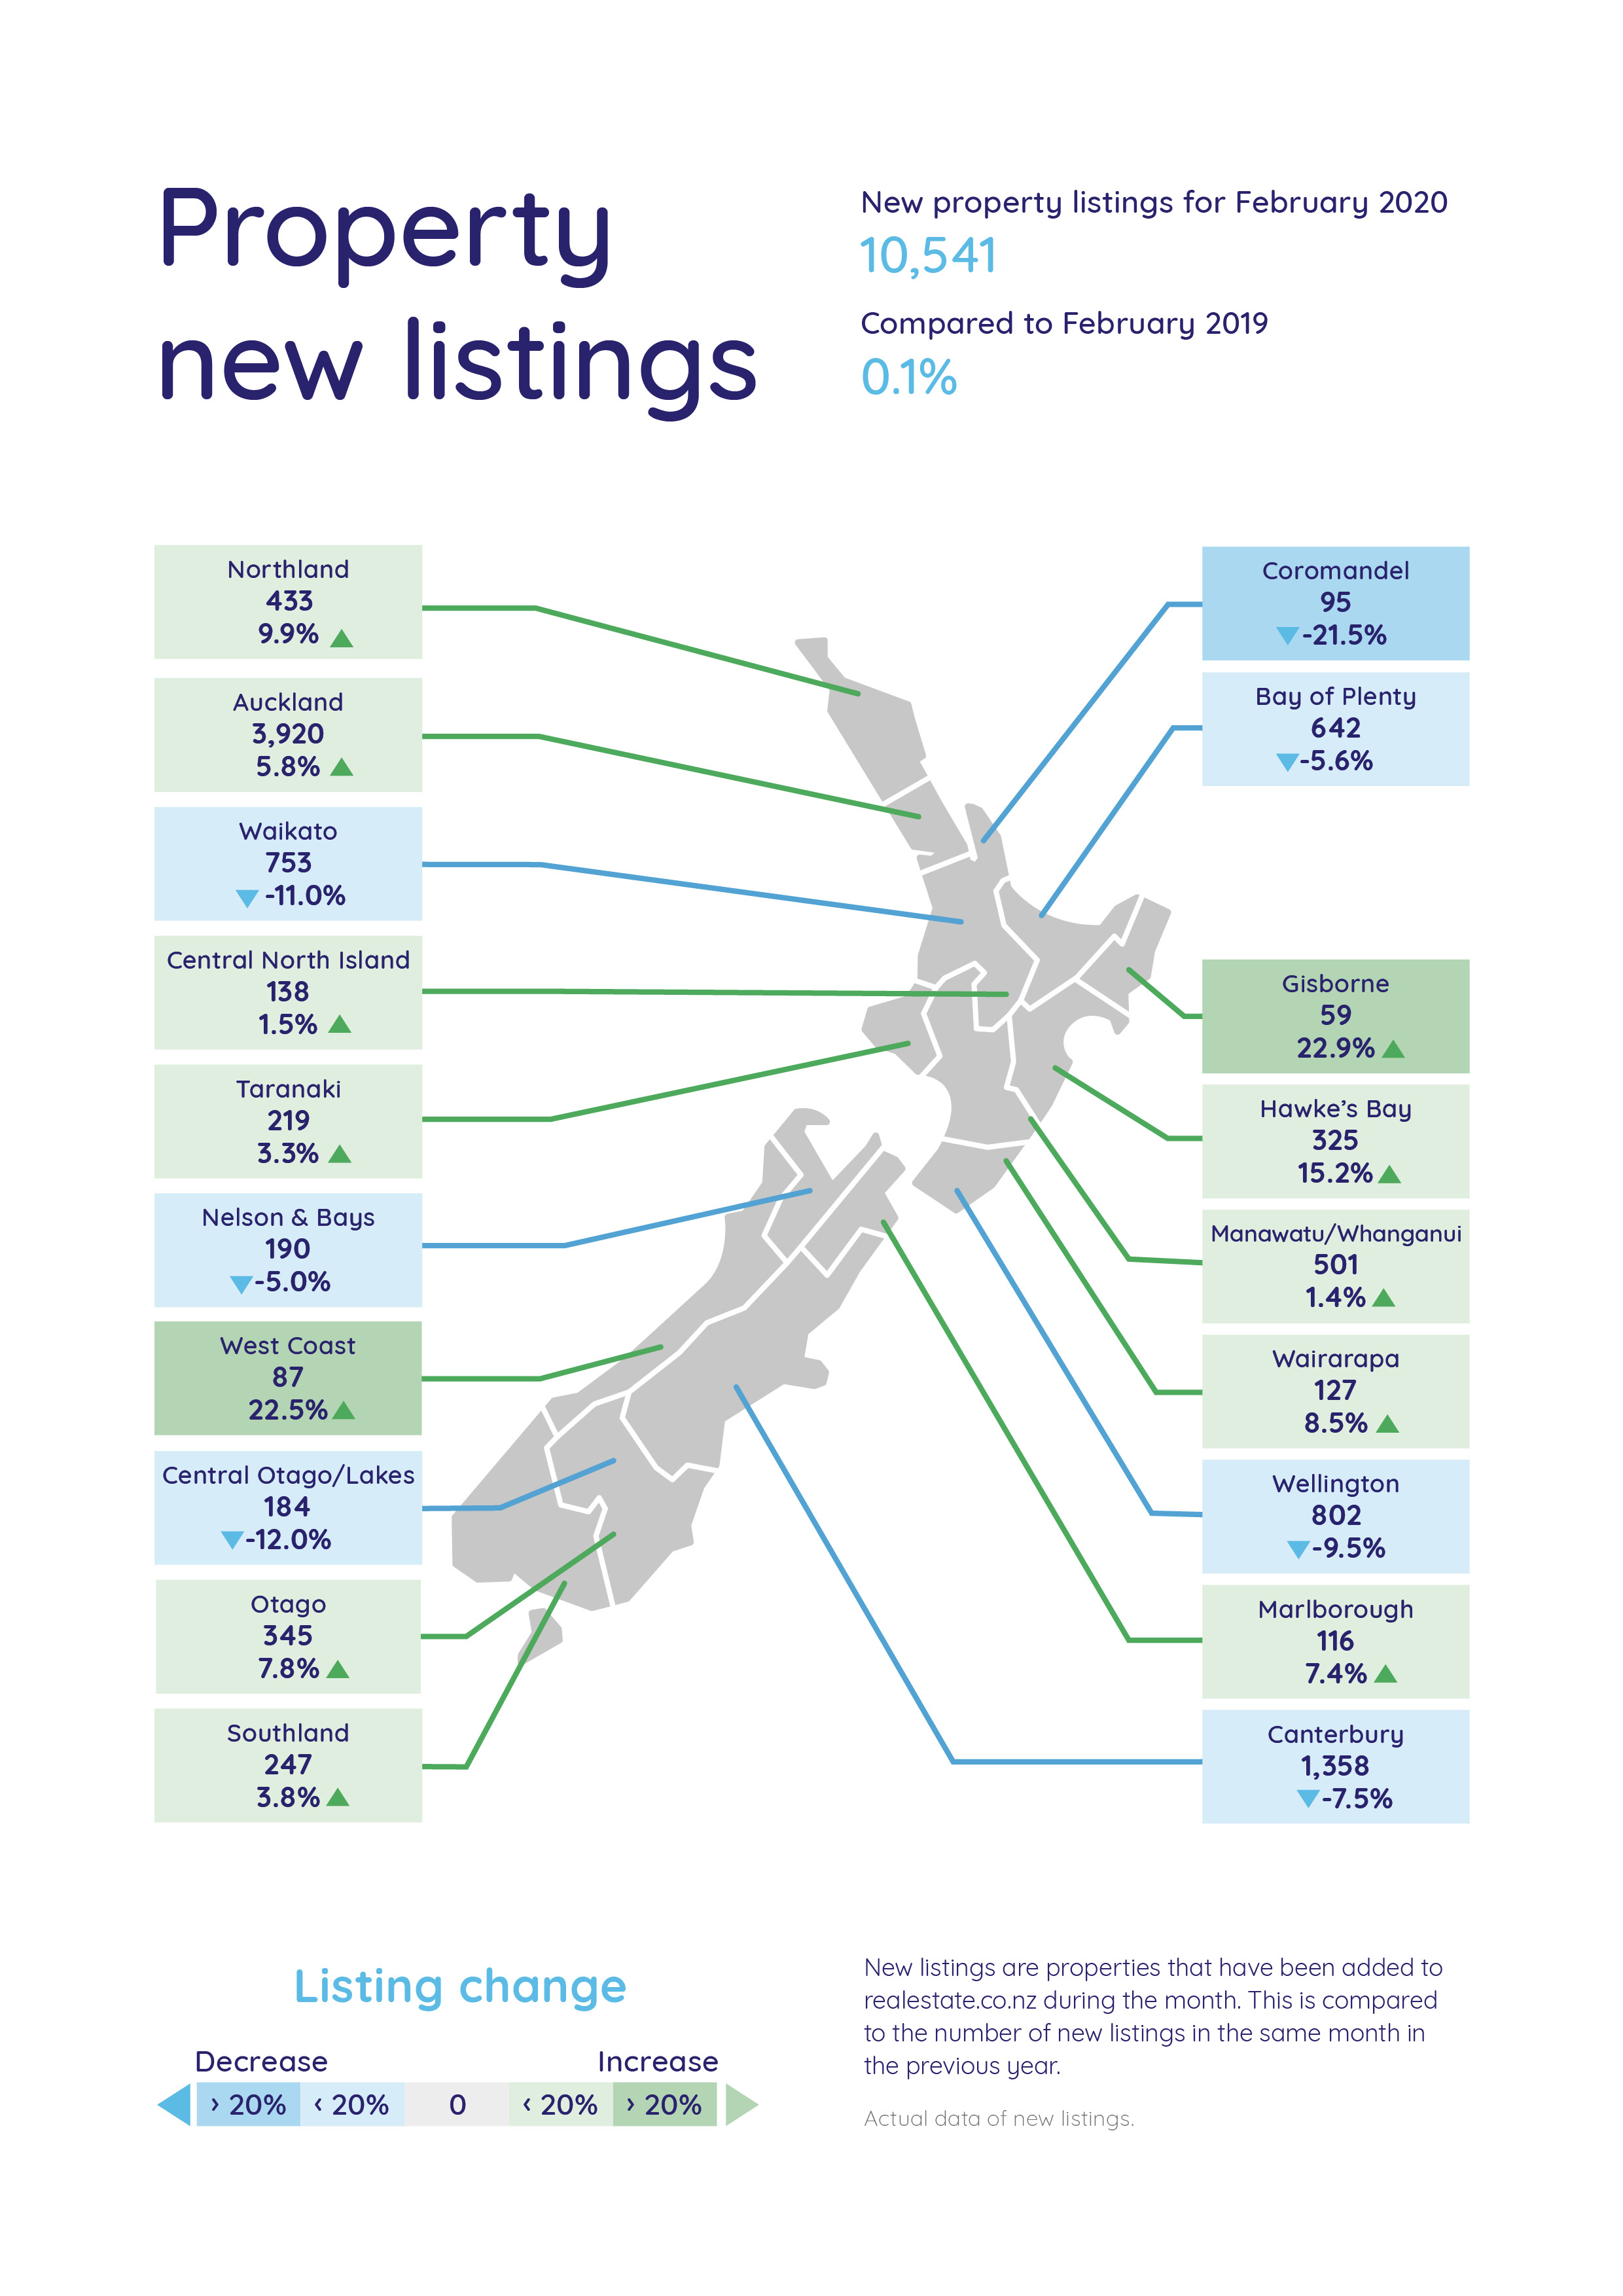 New listings - real time property statistics - Feb 2020